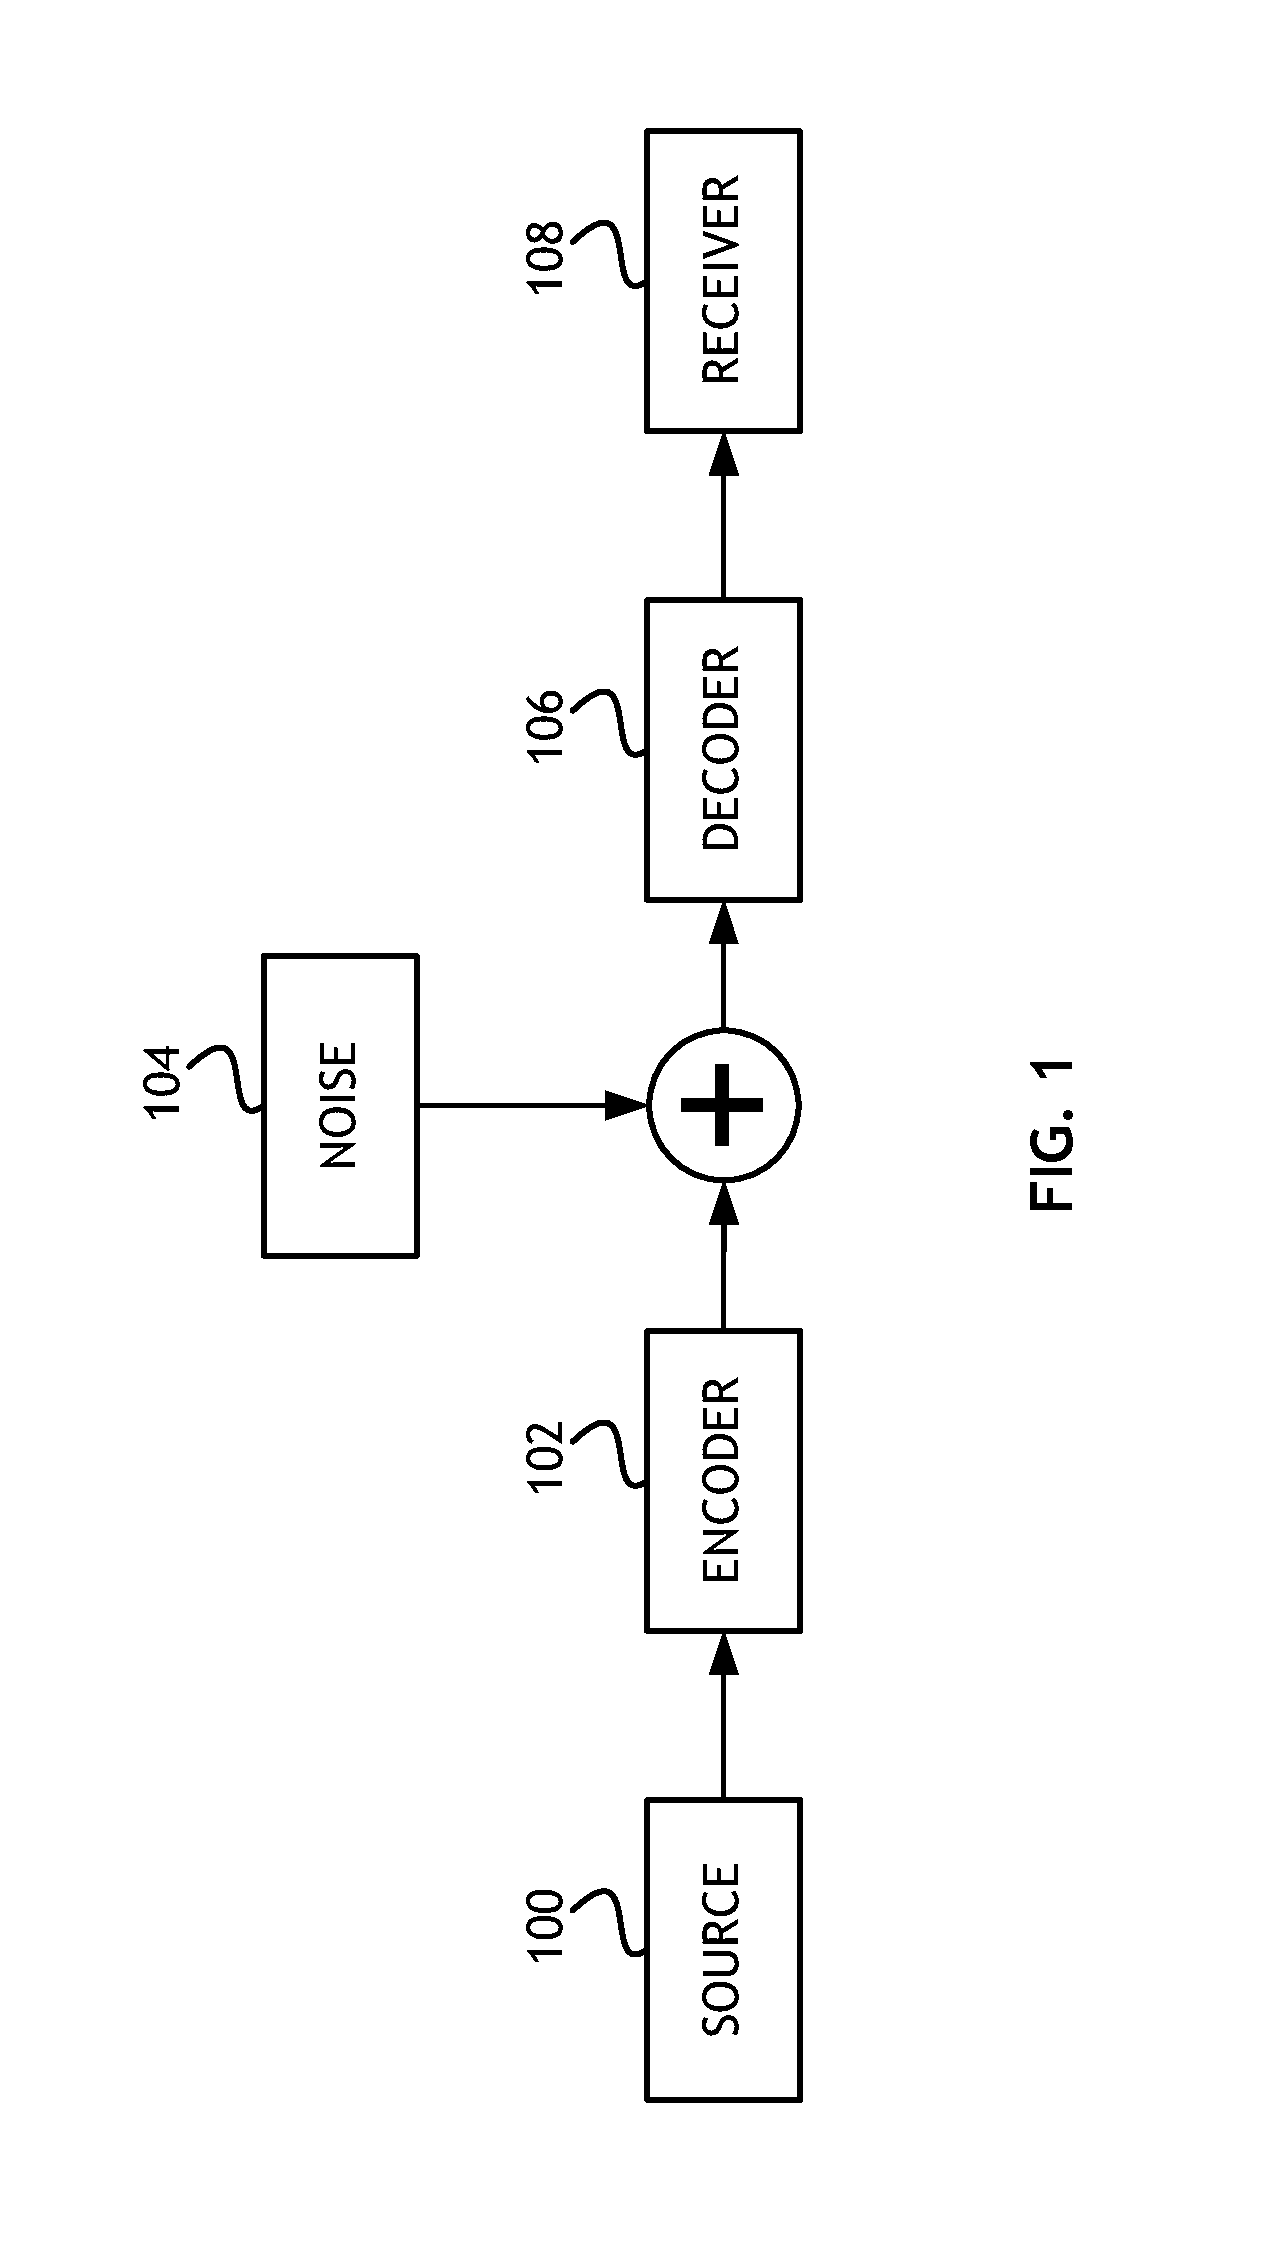 Method for Selecting a LDPC Candidate Code